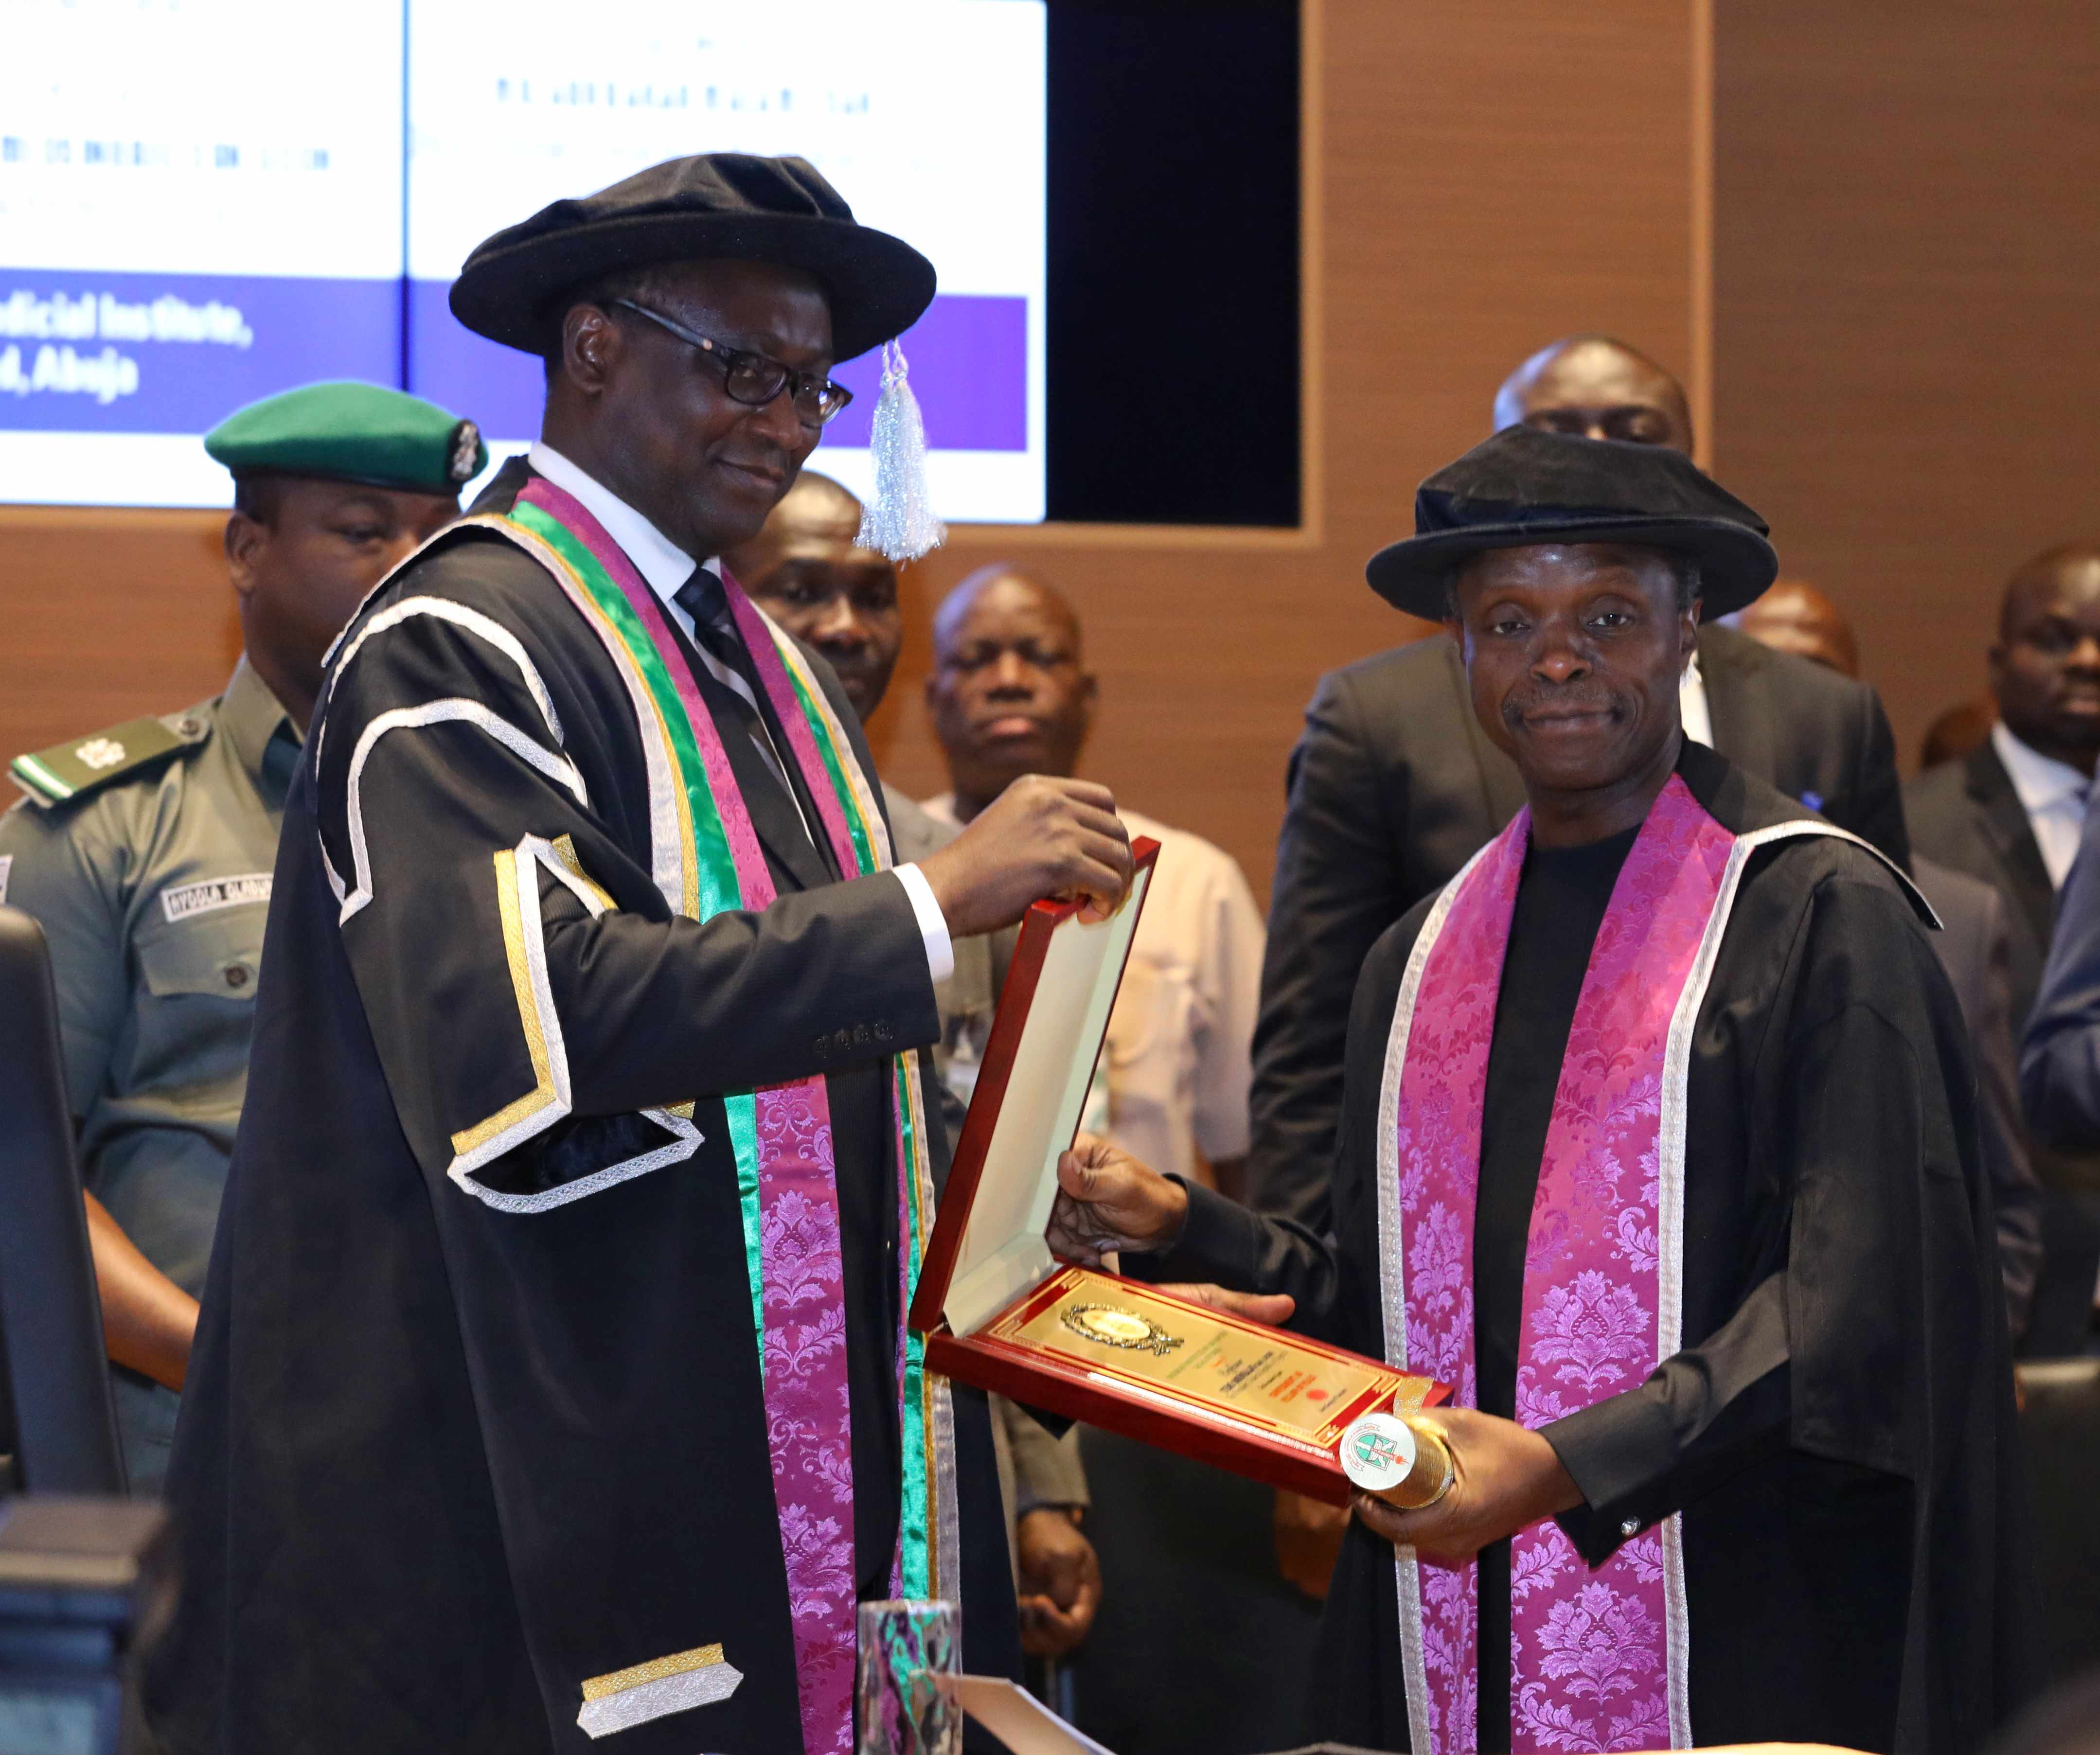 Conferment Of Honourary Fellowship on VP Osinbajo By The Nigerian Institute Of Advanced Legal Studies On 15/11/2016